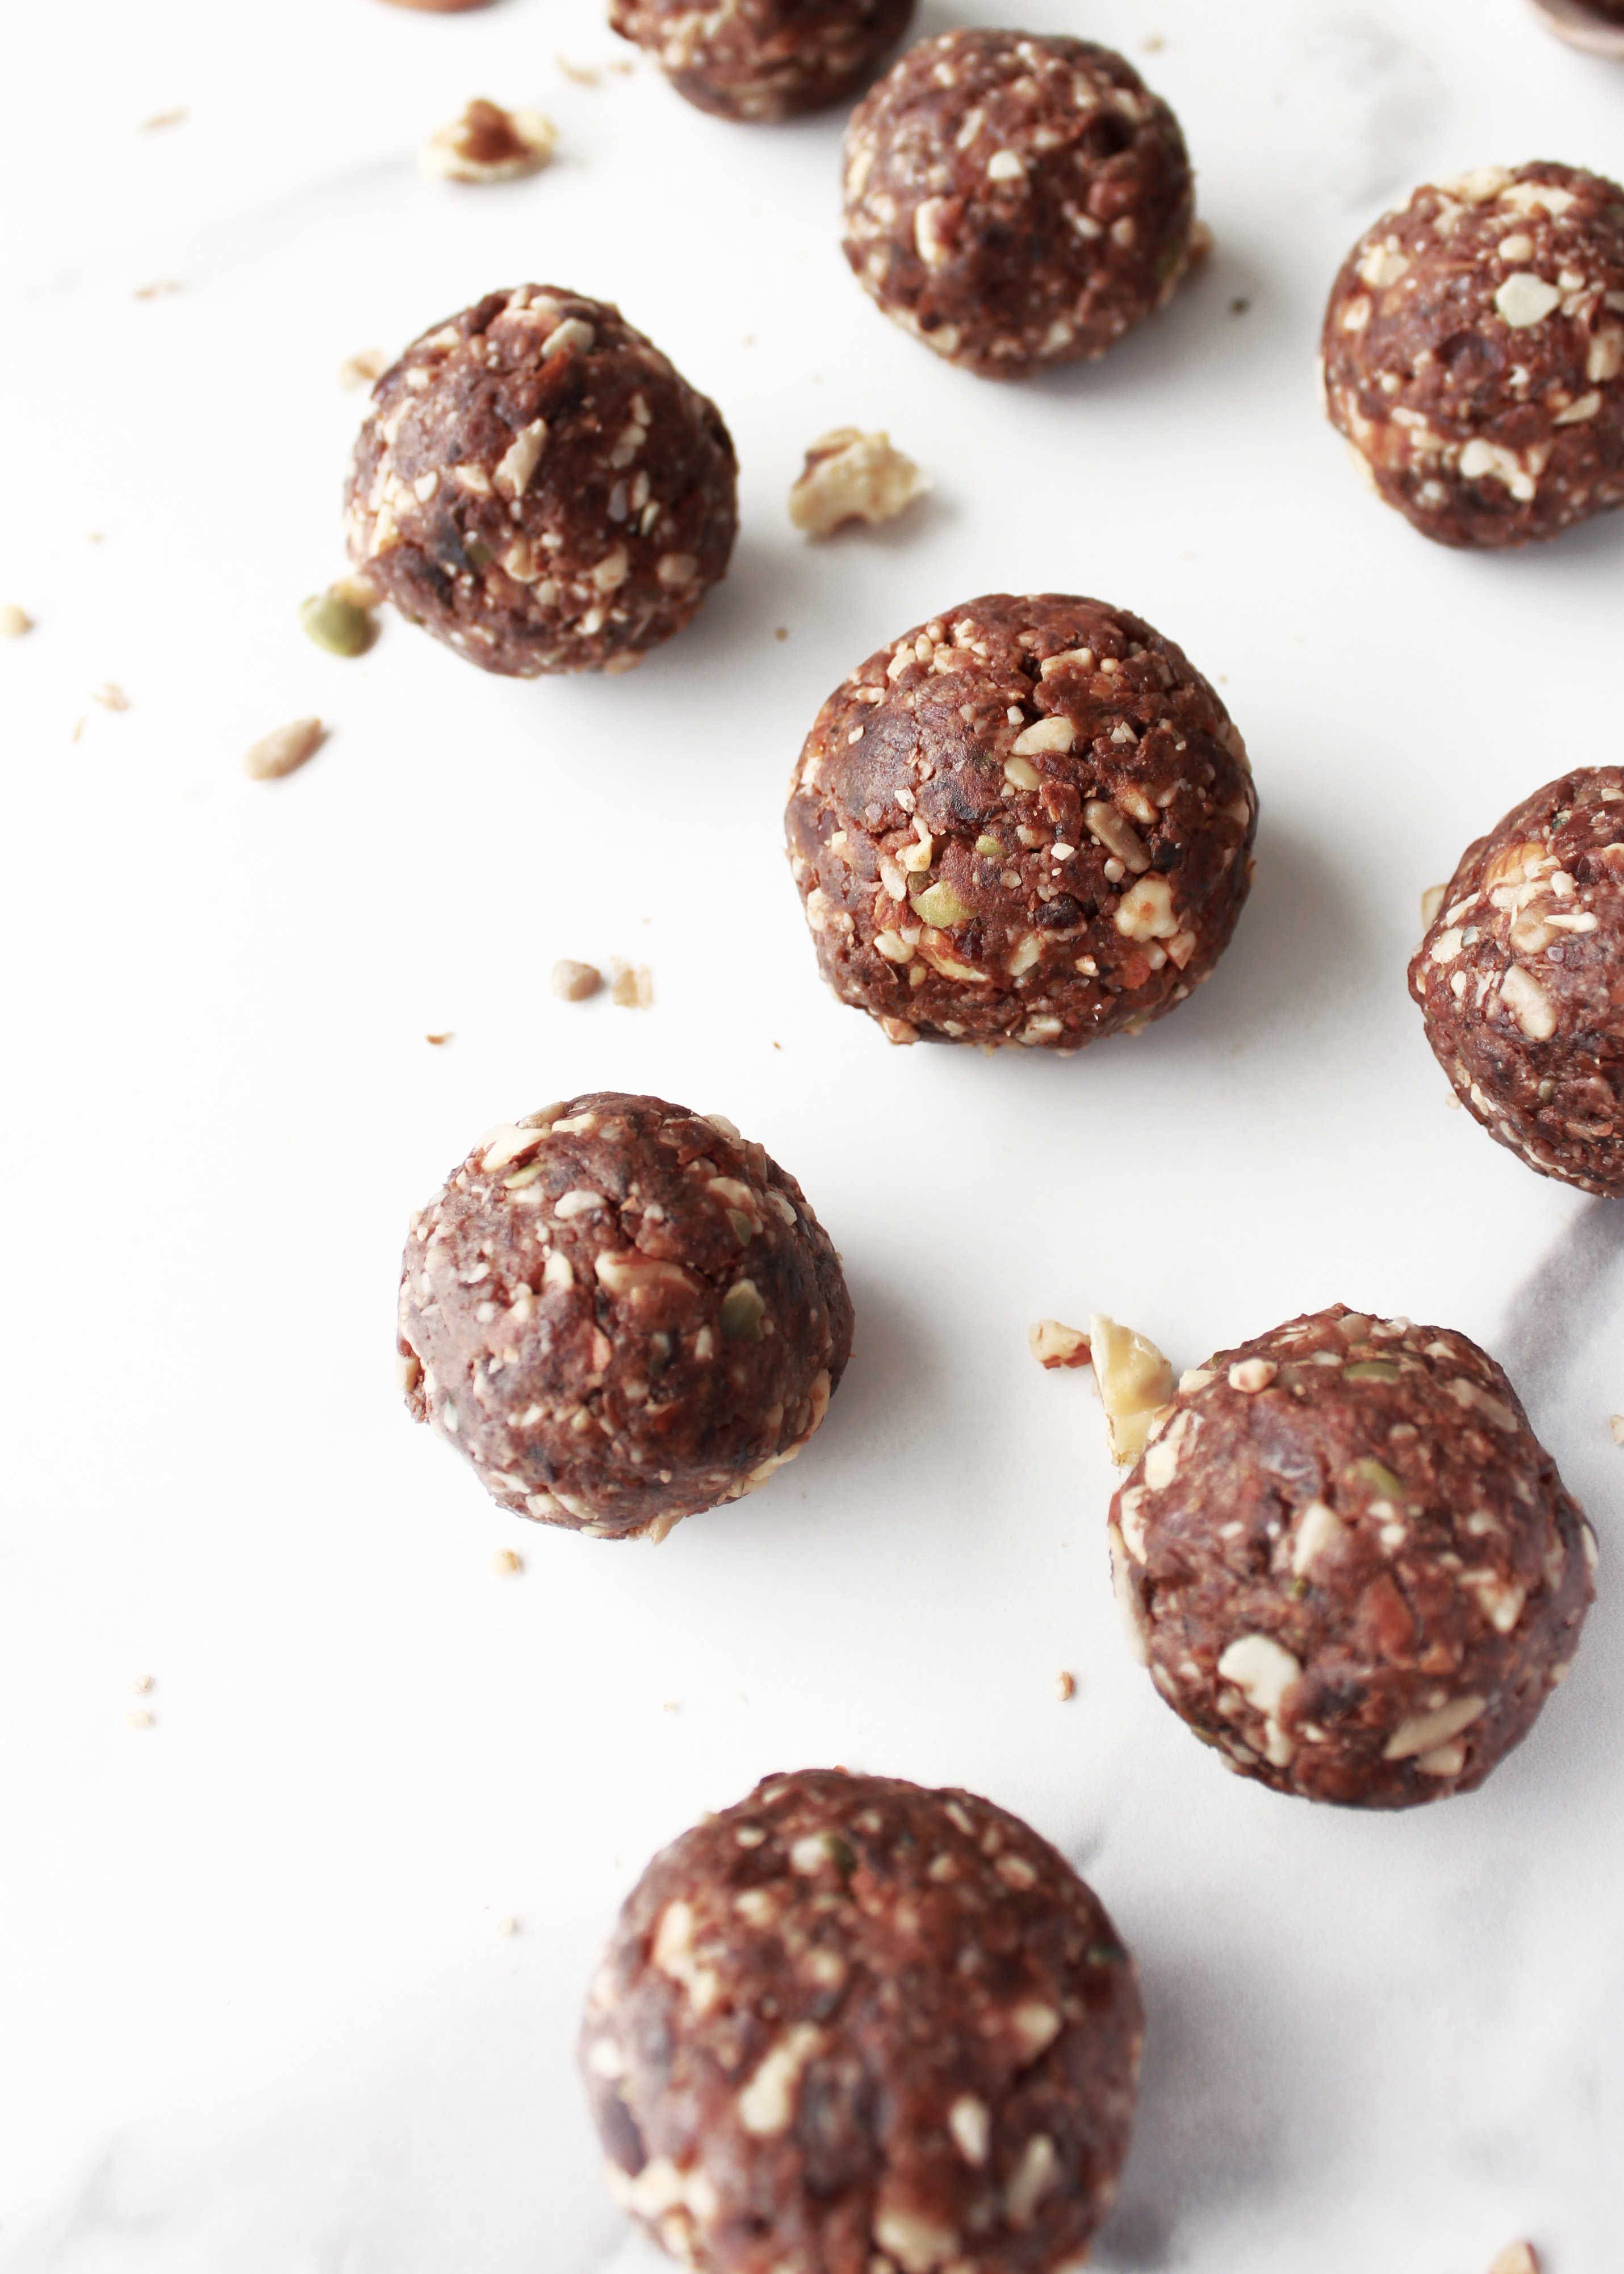 Chocolate nut and cacao seed vegan protein balls with peanut butter, almonds and gluten free, refined sugar free ingredients for a helathy plantbased high protein snack